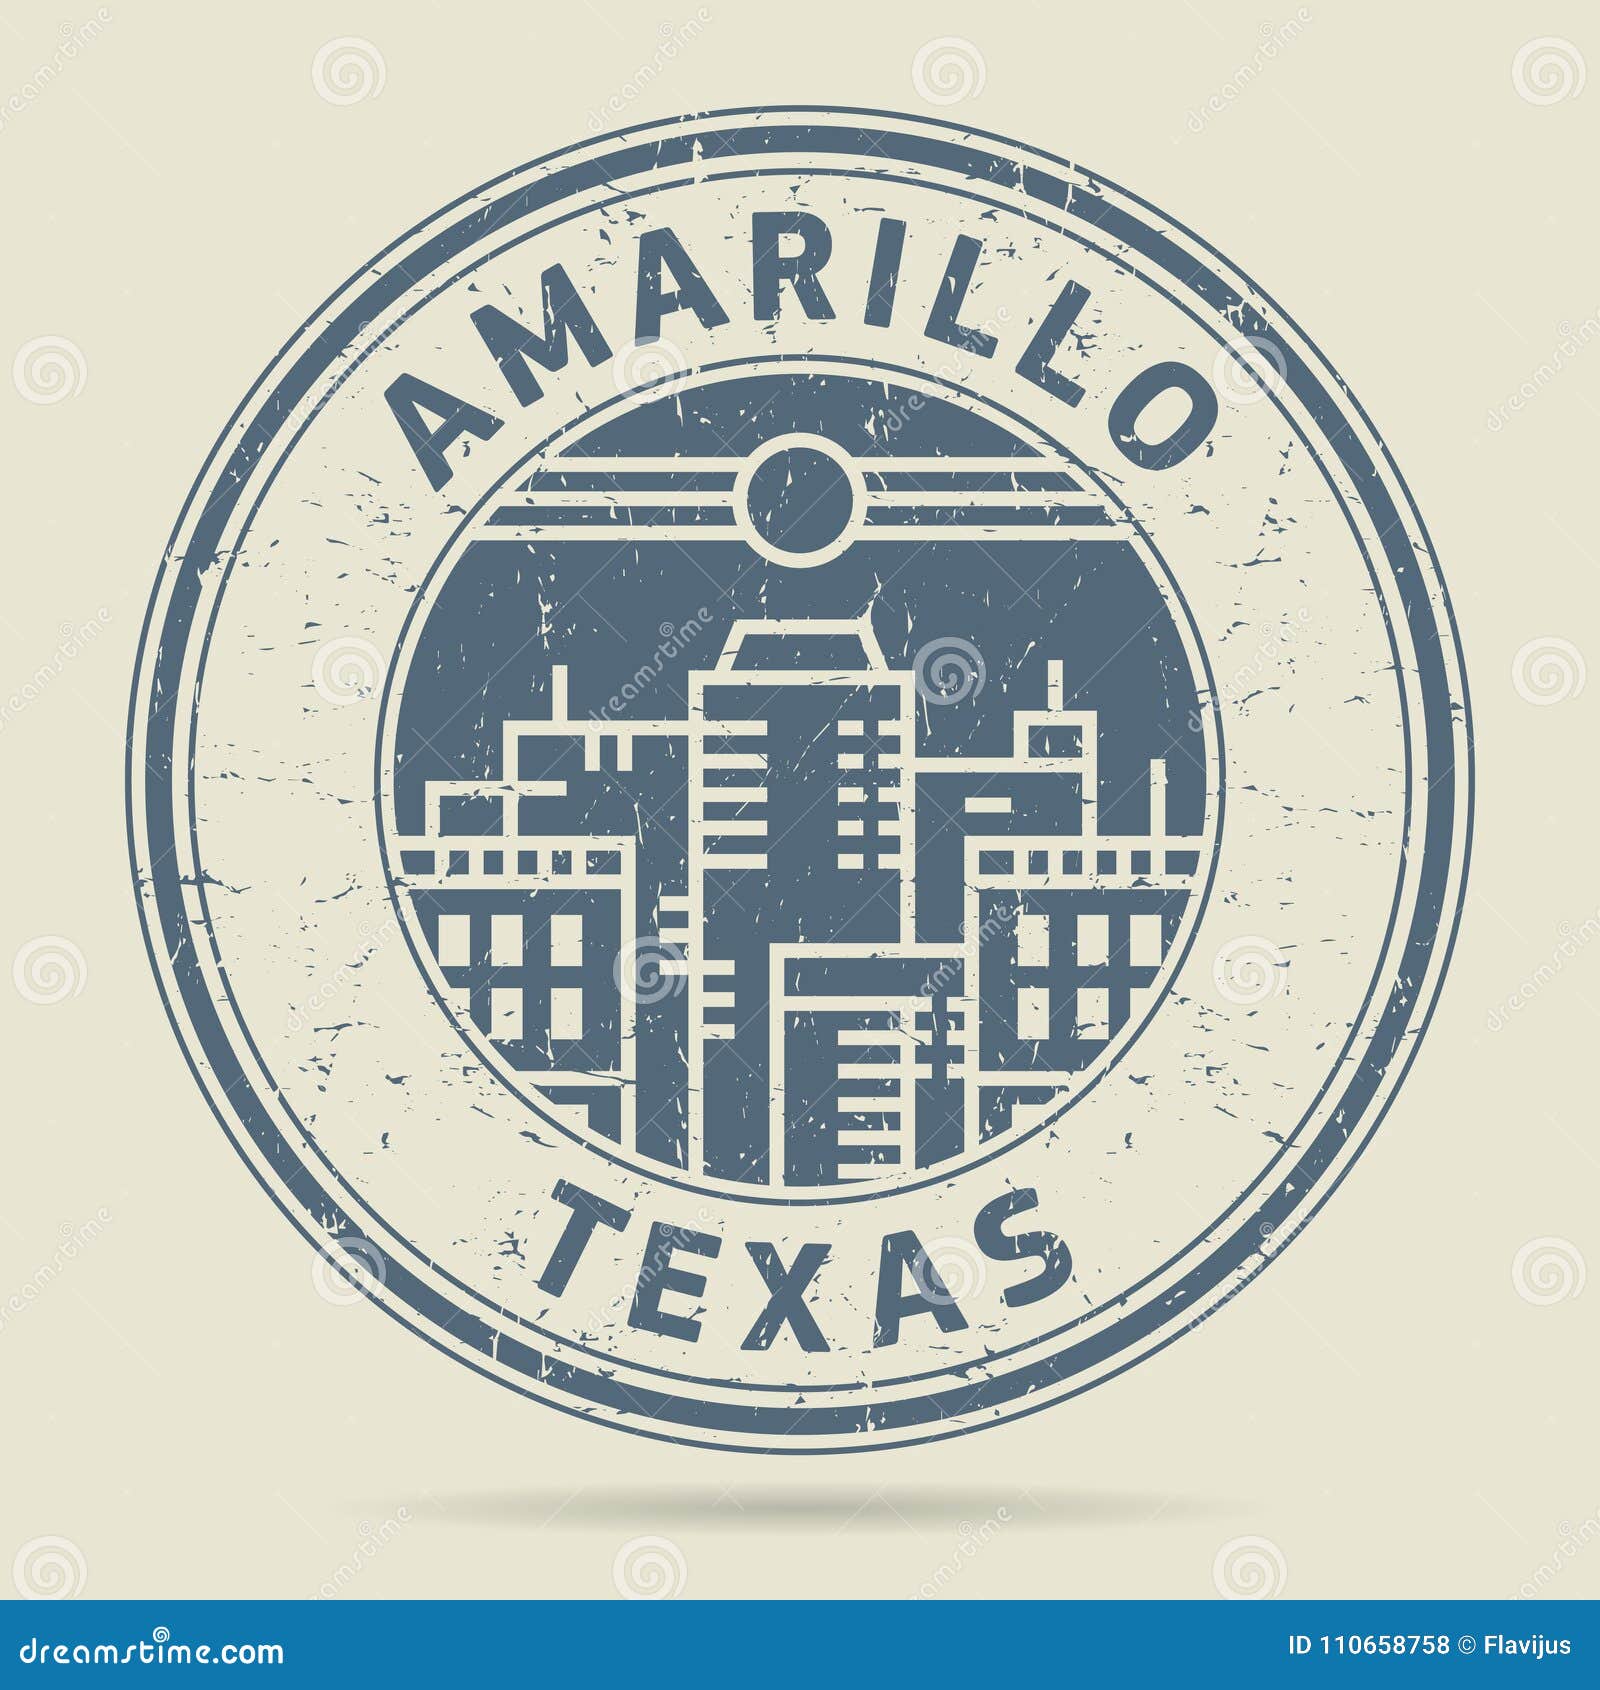 grunge rubber stamp or label with text amarillo, texas